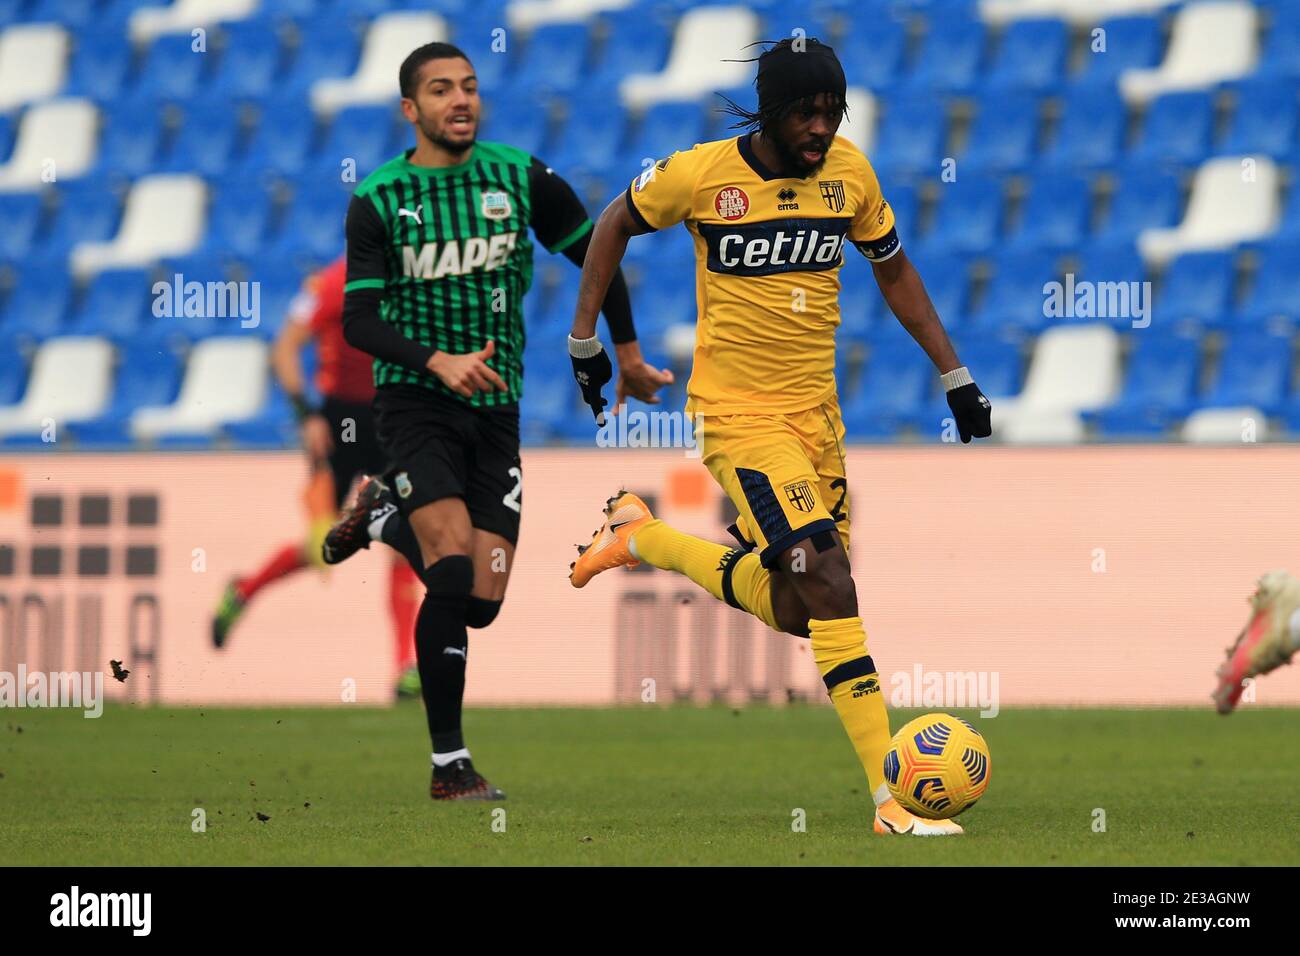 Reggio Emilia, Italy. 17th Jan, 2021. Gervinho (Parma) in action during the Serie A Tim match between US Sassuolo and Parma Calcio 1913 FC at Mapei Stadium Città del Tricolore on January, 17 2021 in Reggio Emilia, Italy. (Photo by Giuseppe Fama/Pacific Press) Credit: Pacific Press Media Production Corp./Alamy Live News Stock Photo